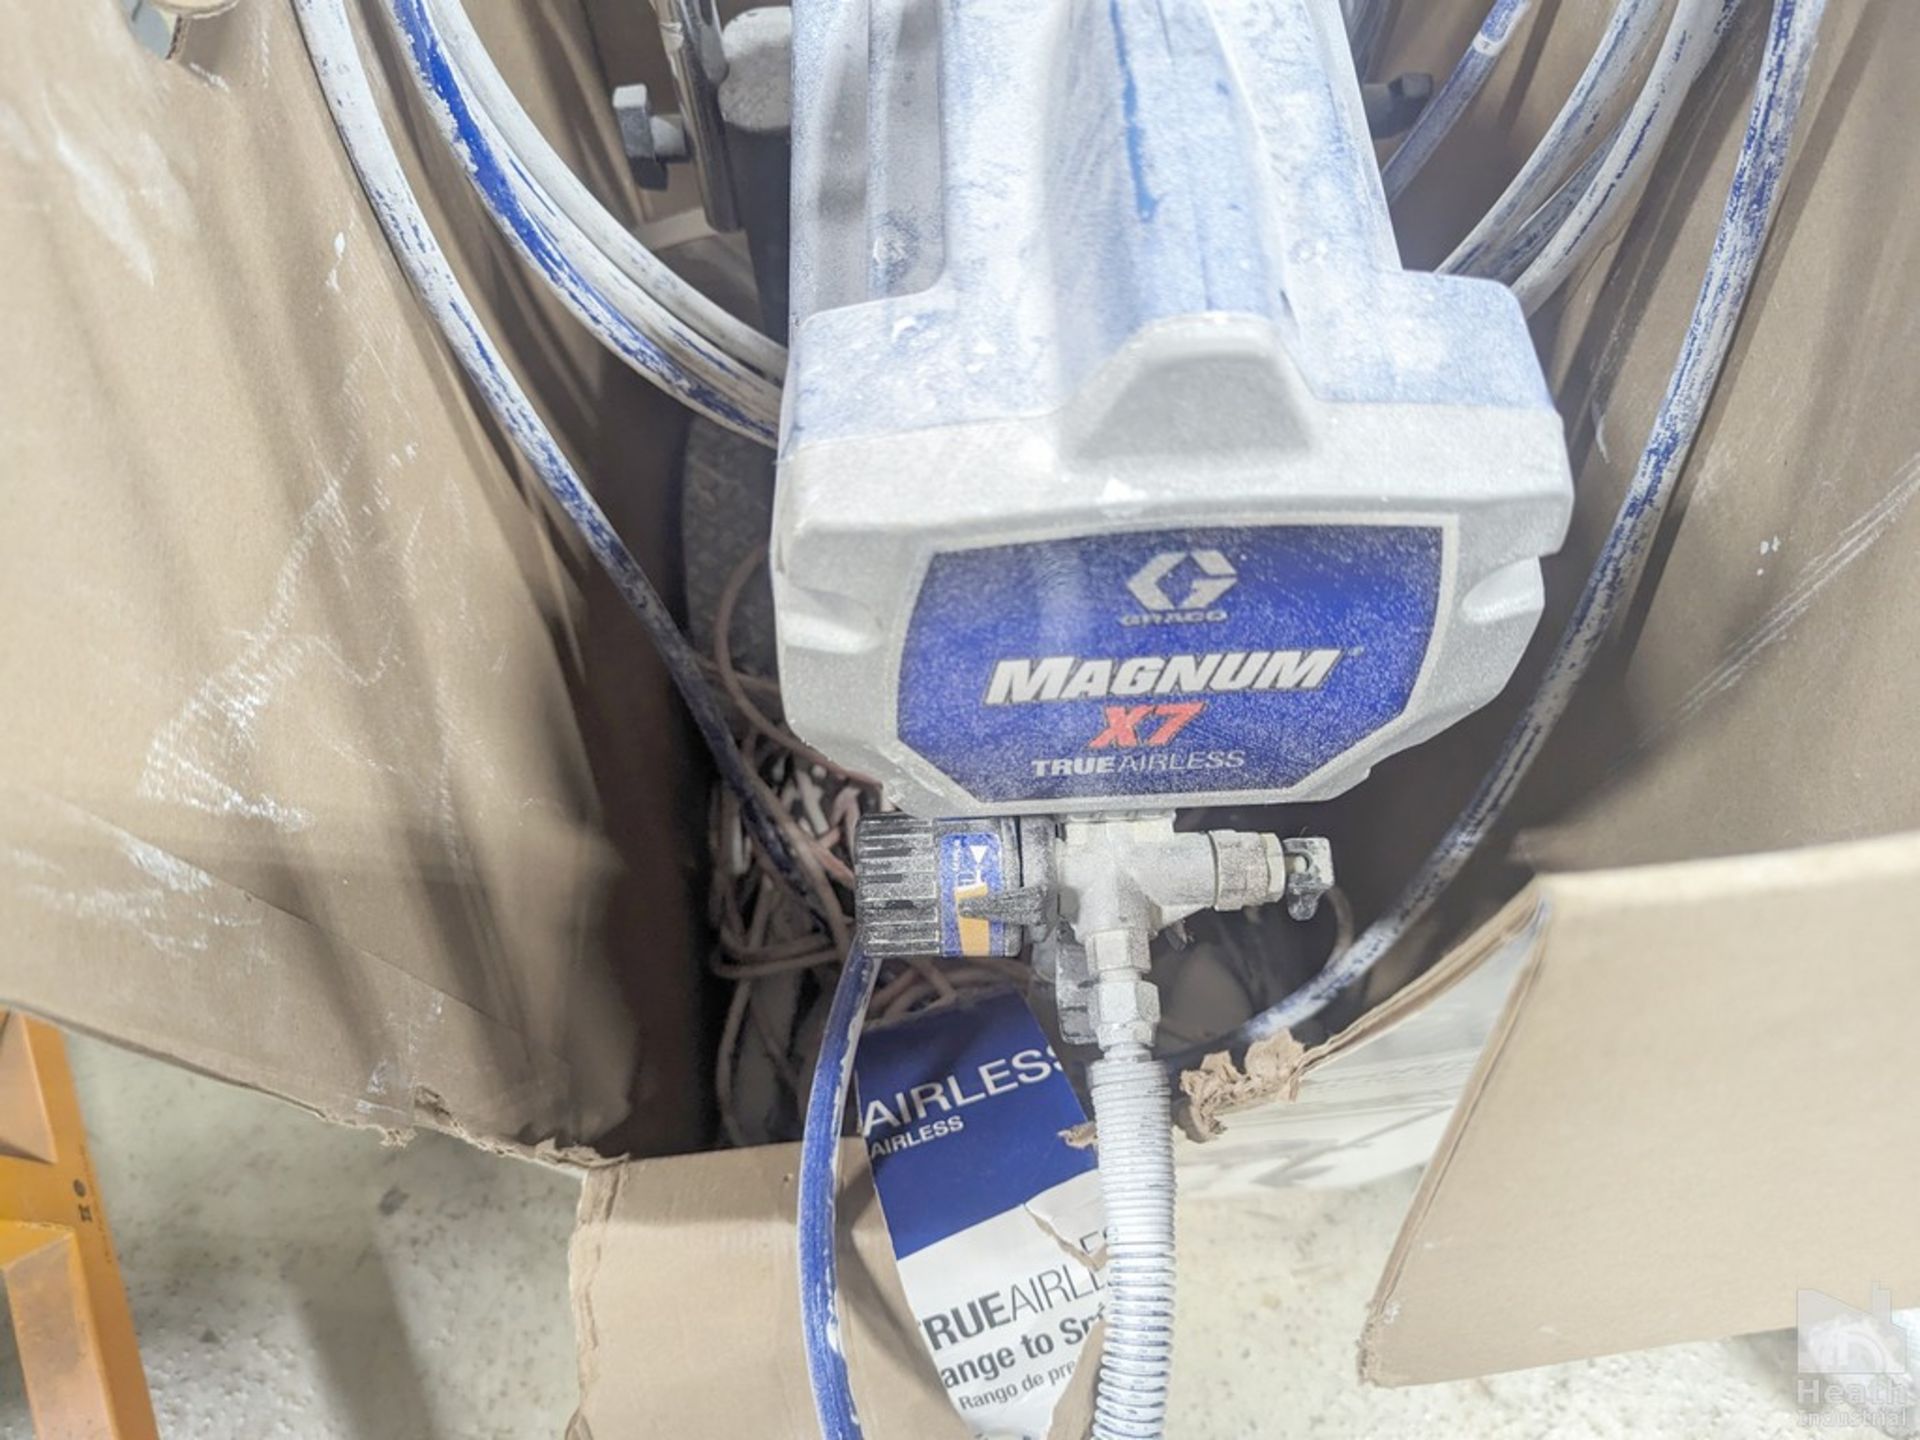 GRACO MAGNUM X7 TRUE AIRLESS PAINT SPRAYER WITH ROLLING STAND - Image 2 of 4